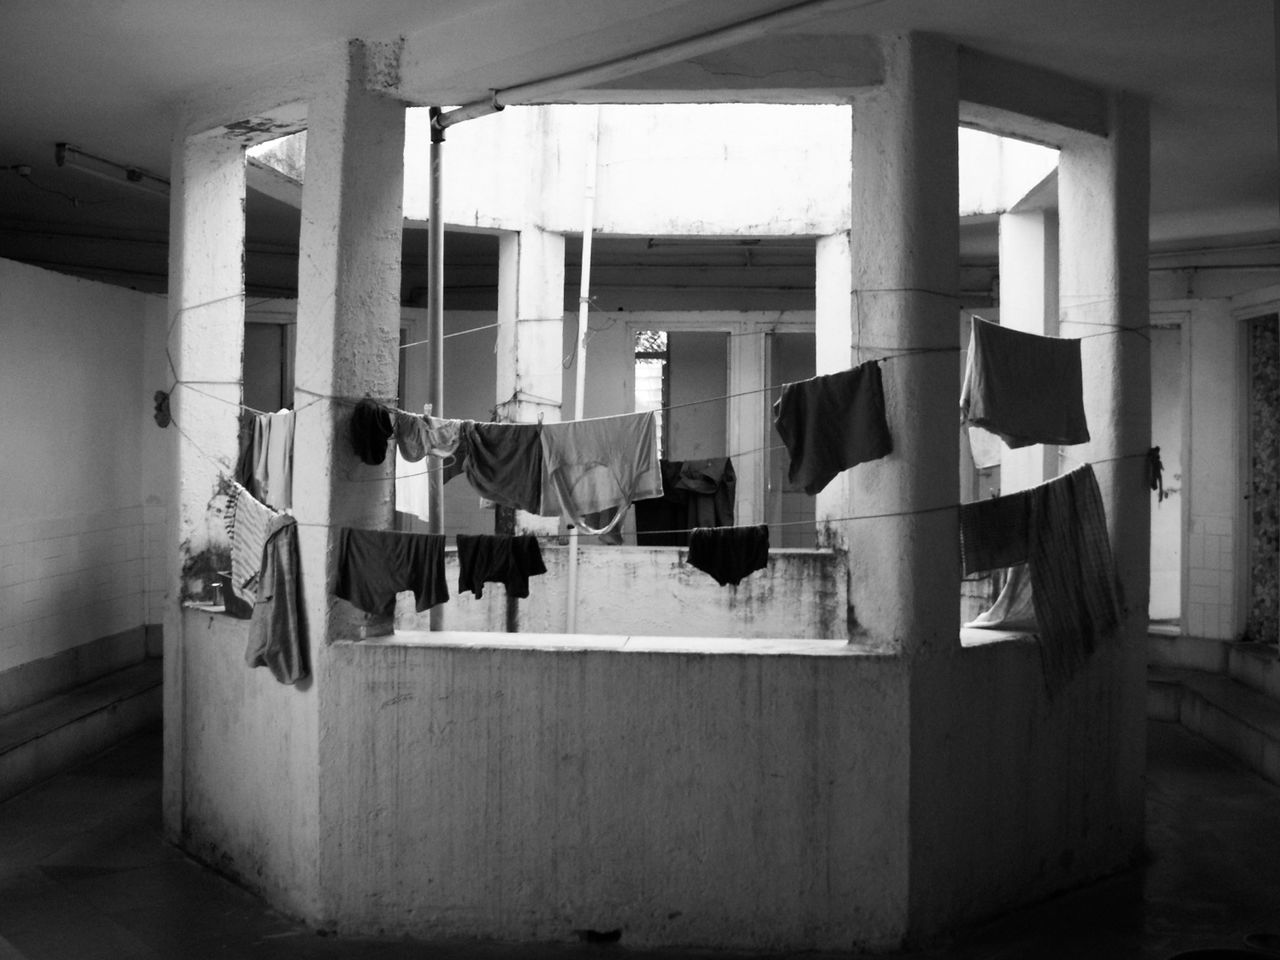 Clothes drying in building